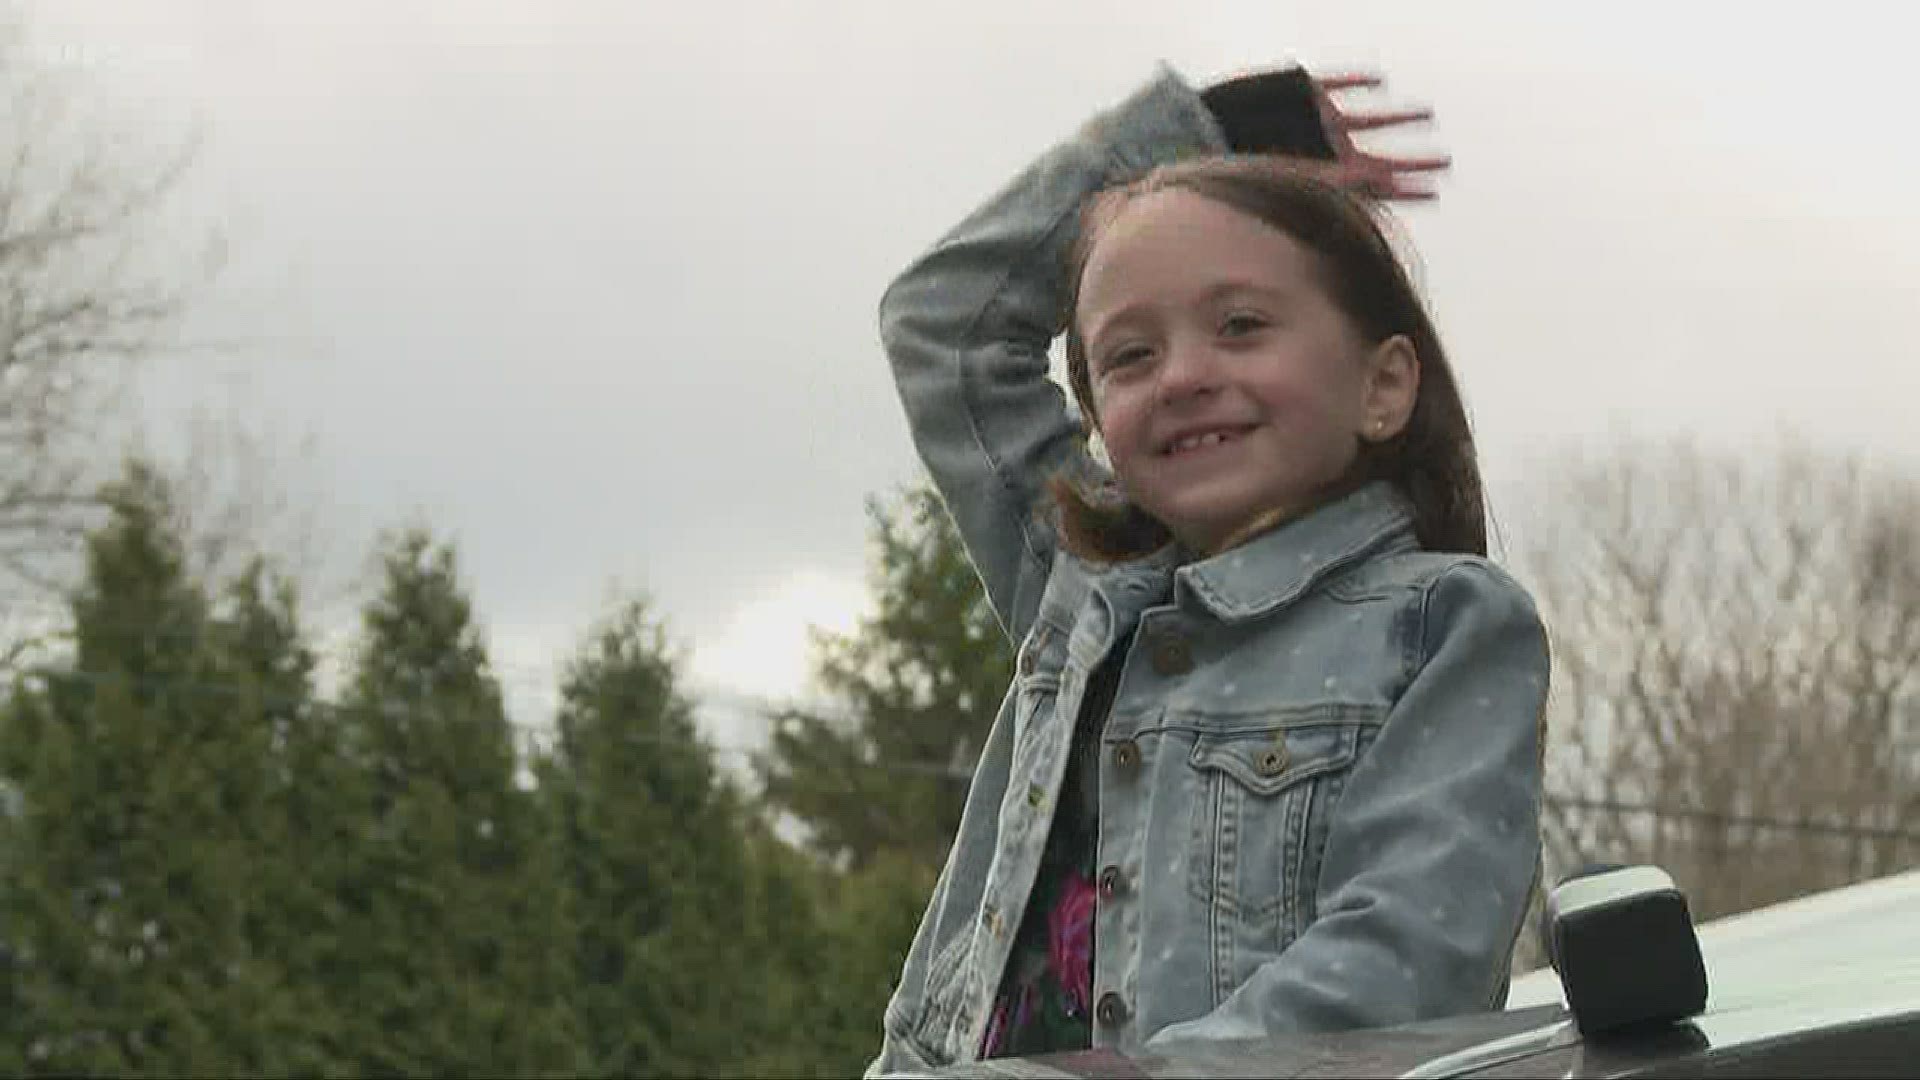 7-year-old Lucy DeFranco is making an impact in Geauga County -- and she's doing it with the simple gesture of waving at people as they drive by her house.